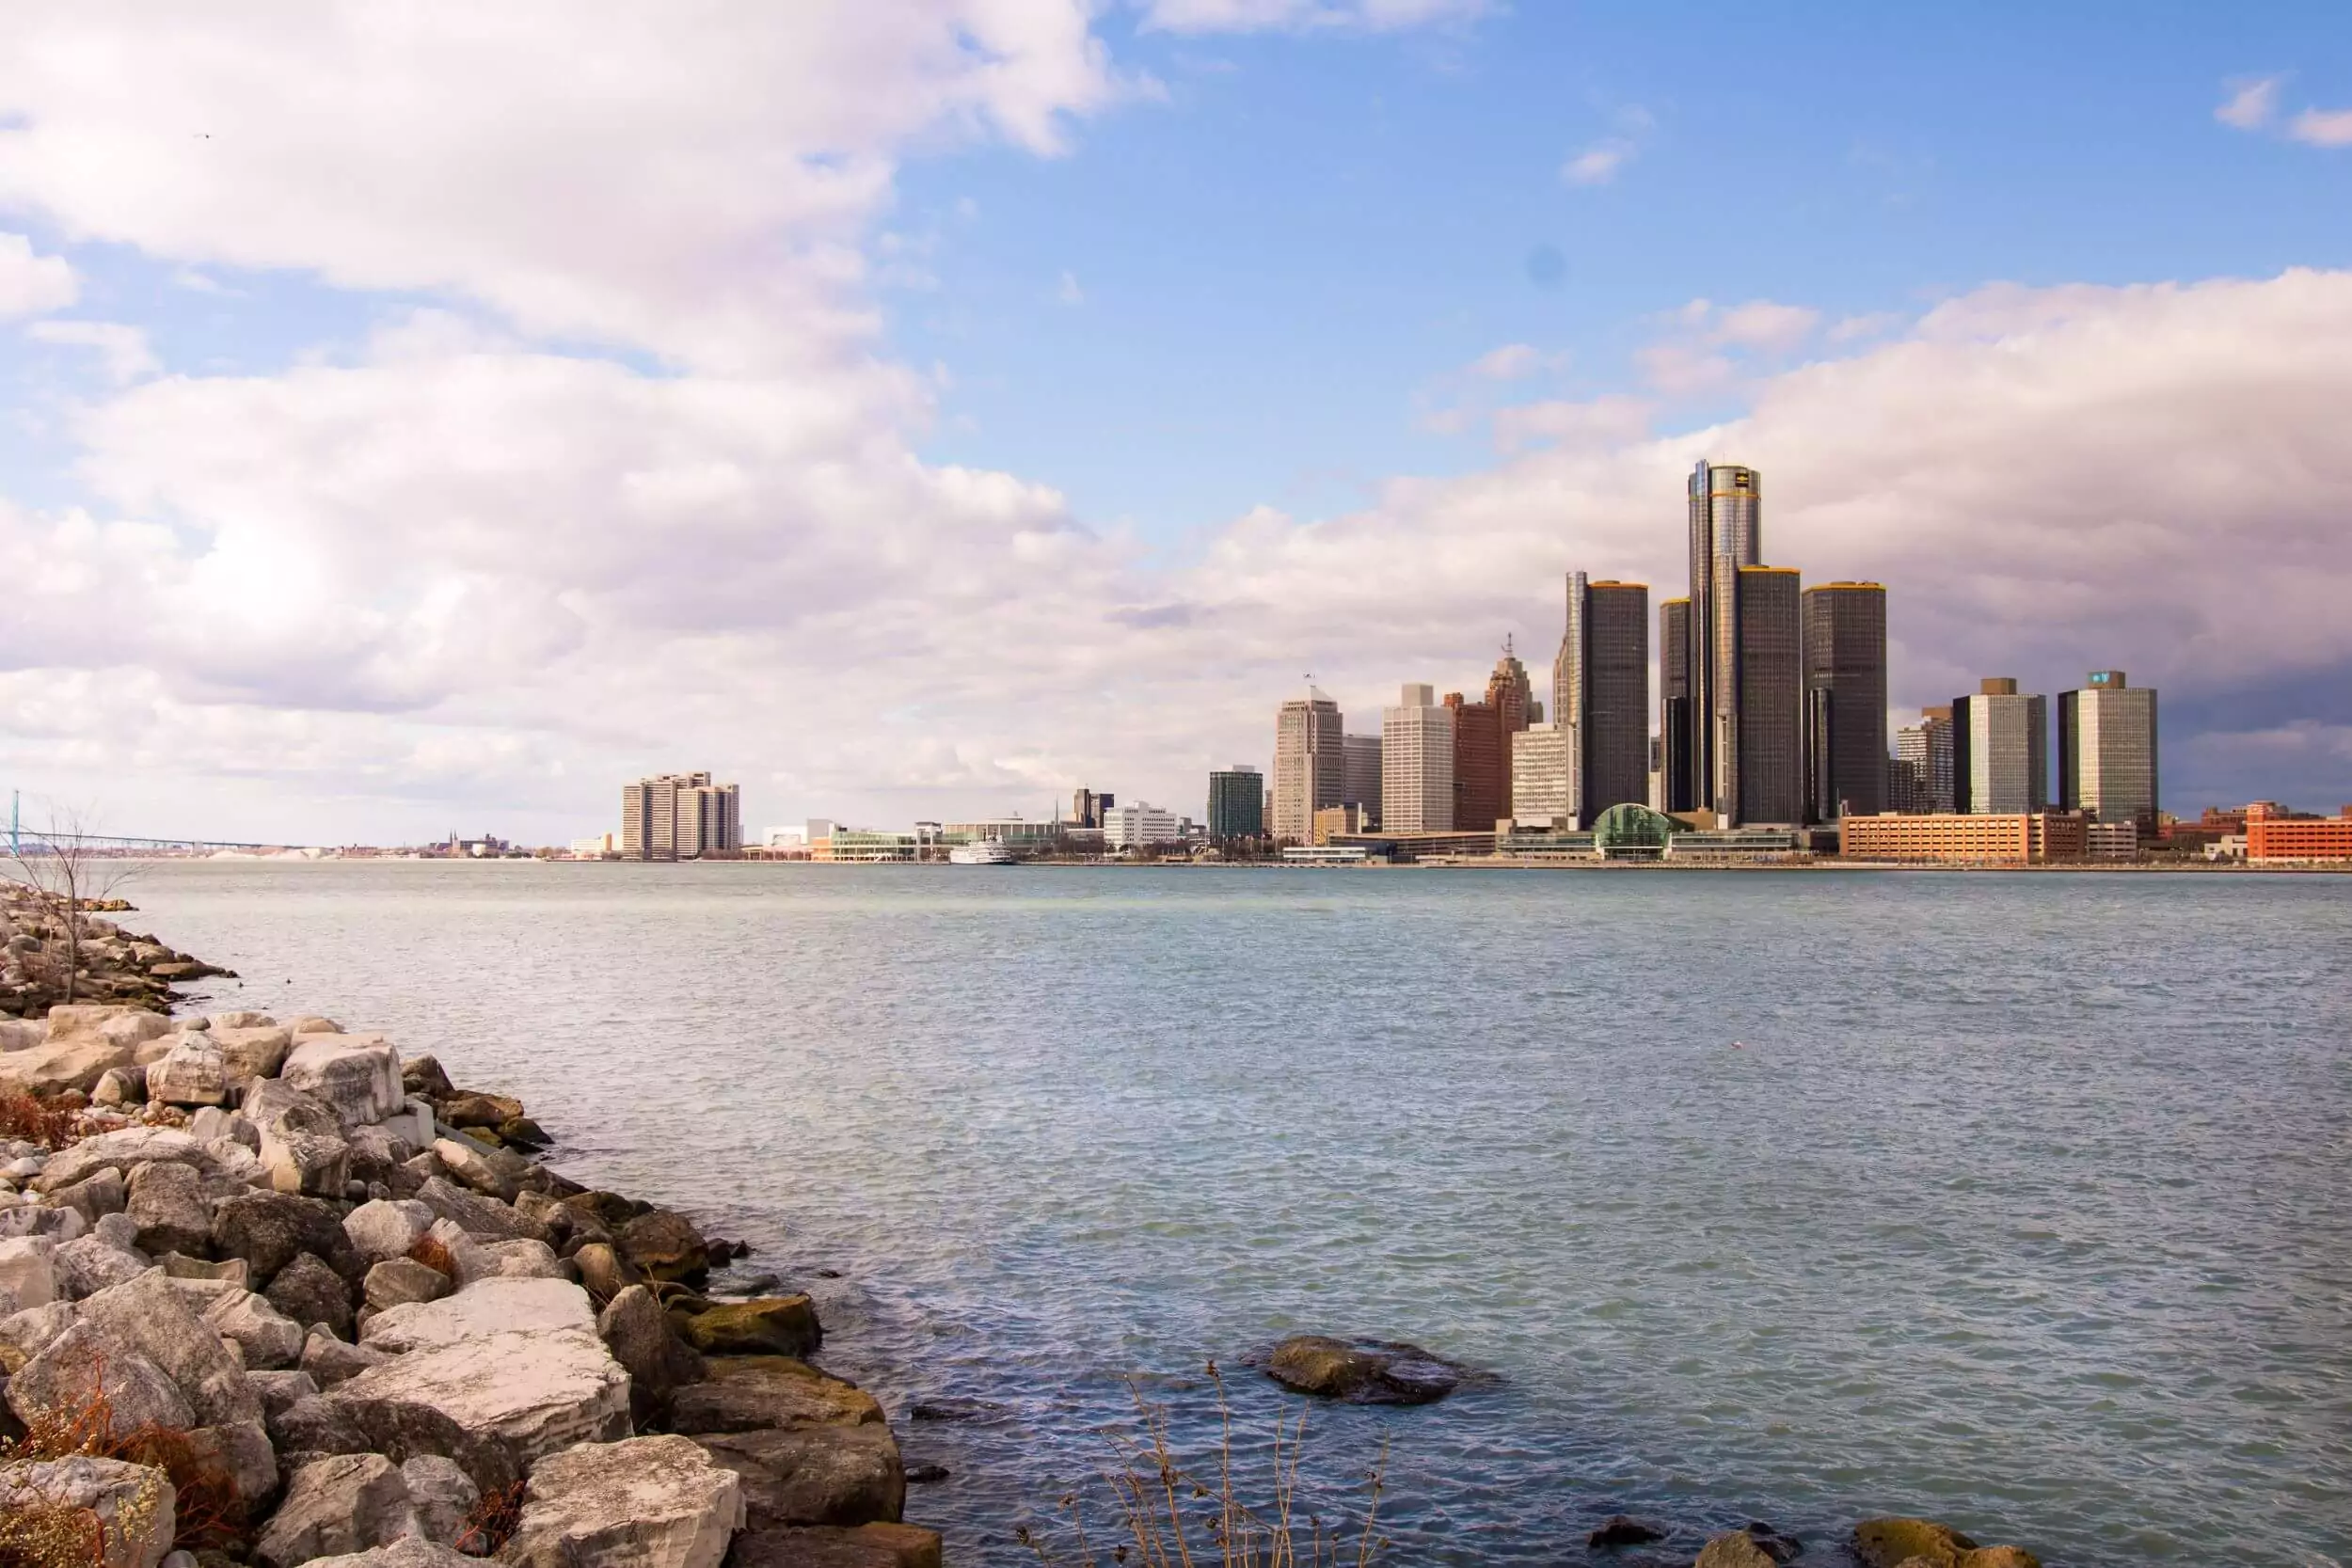 Detroit's cityscape on a partly cloudly day.